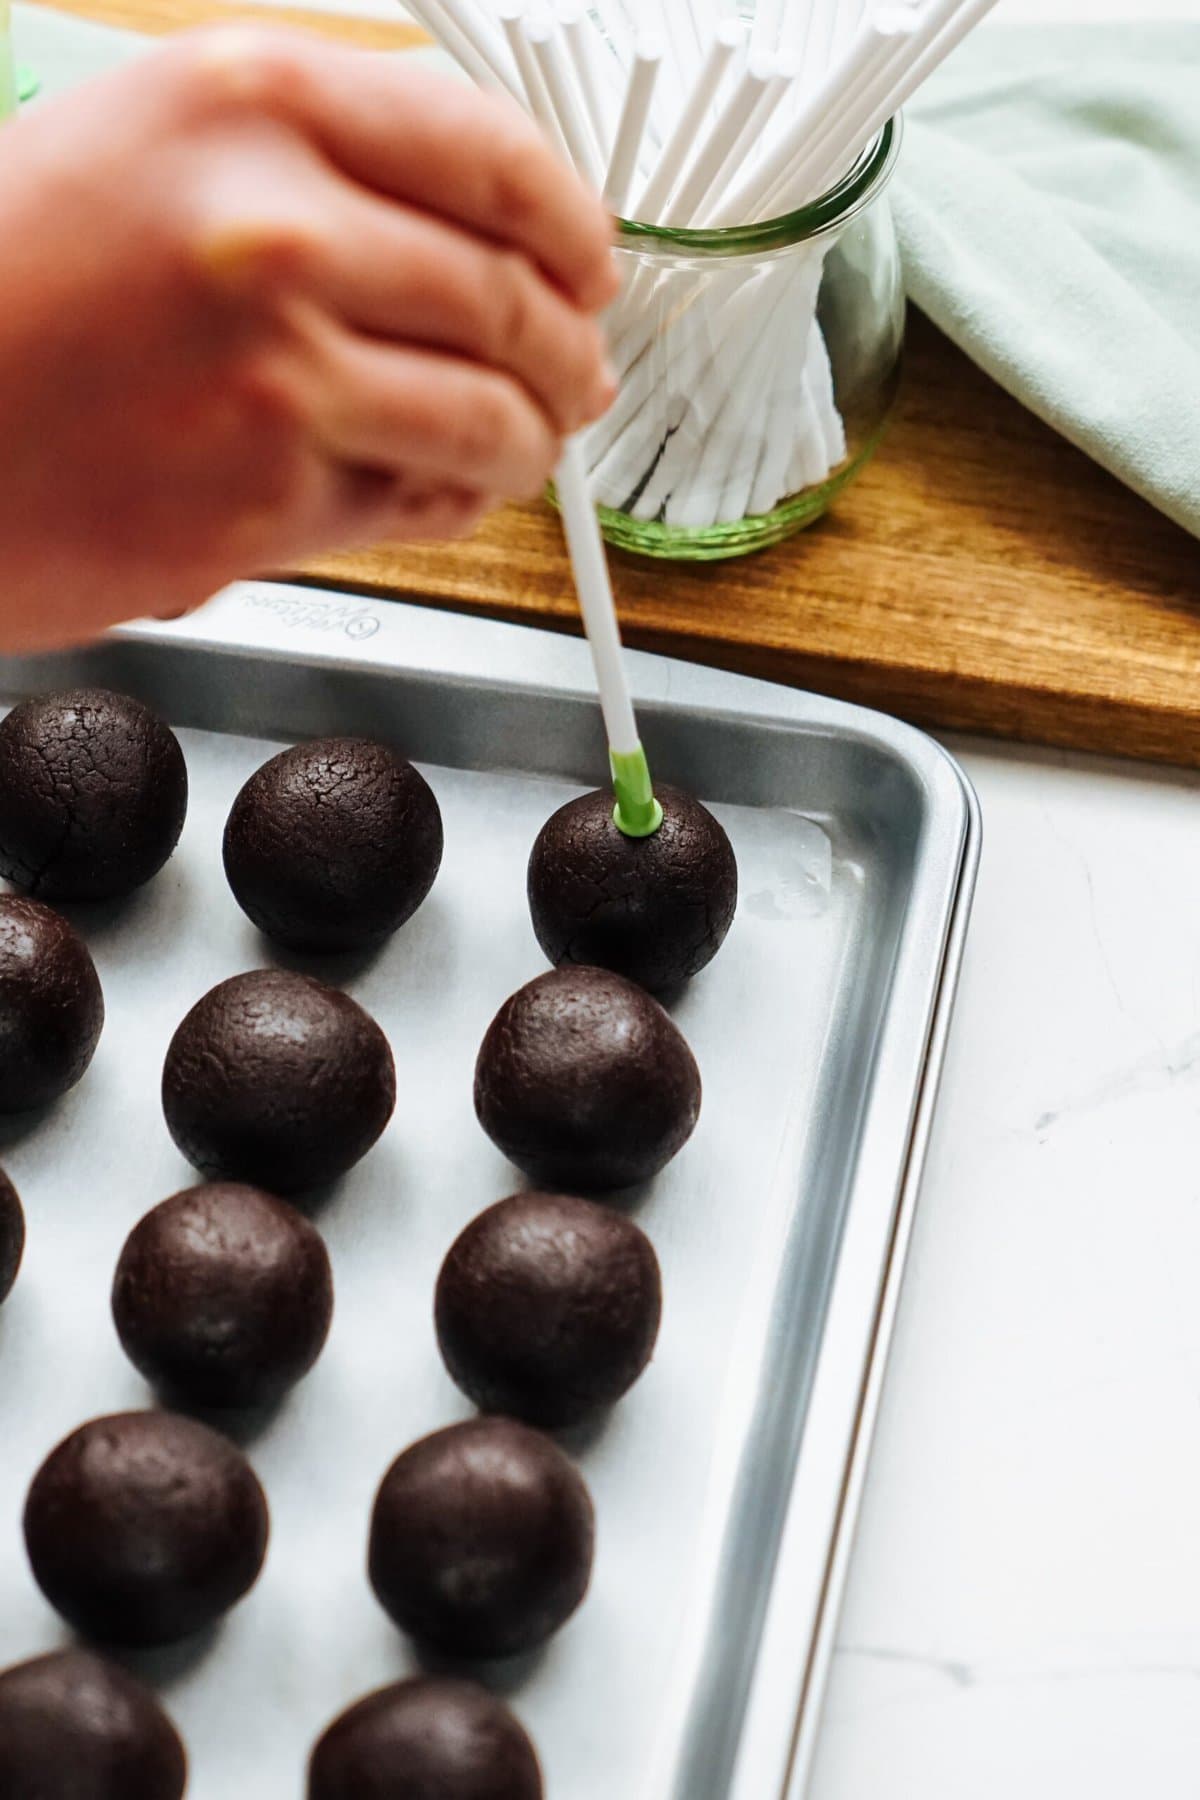 A person is putting a cake pop stick in chocolate balls on a baking sheet.